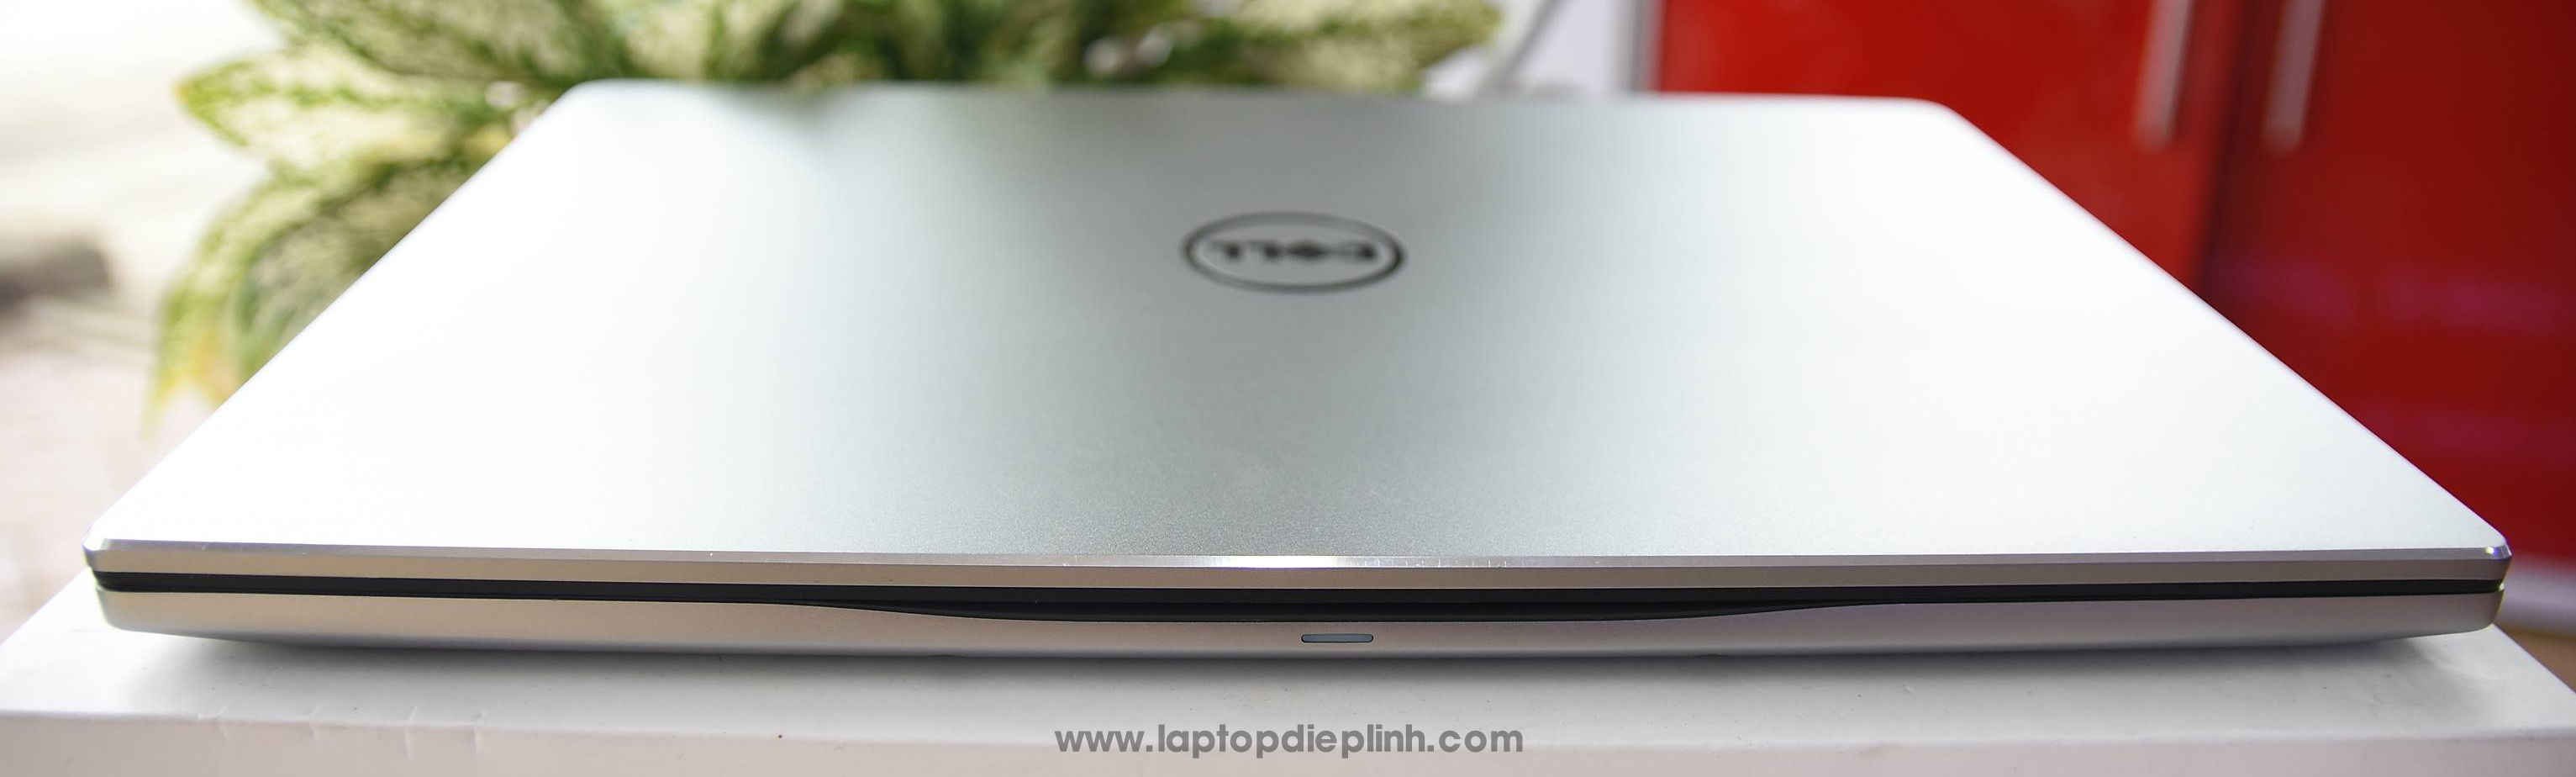 dell inspiron n7460 - laptop diep linh